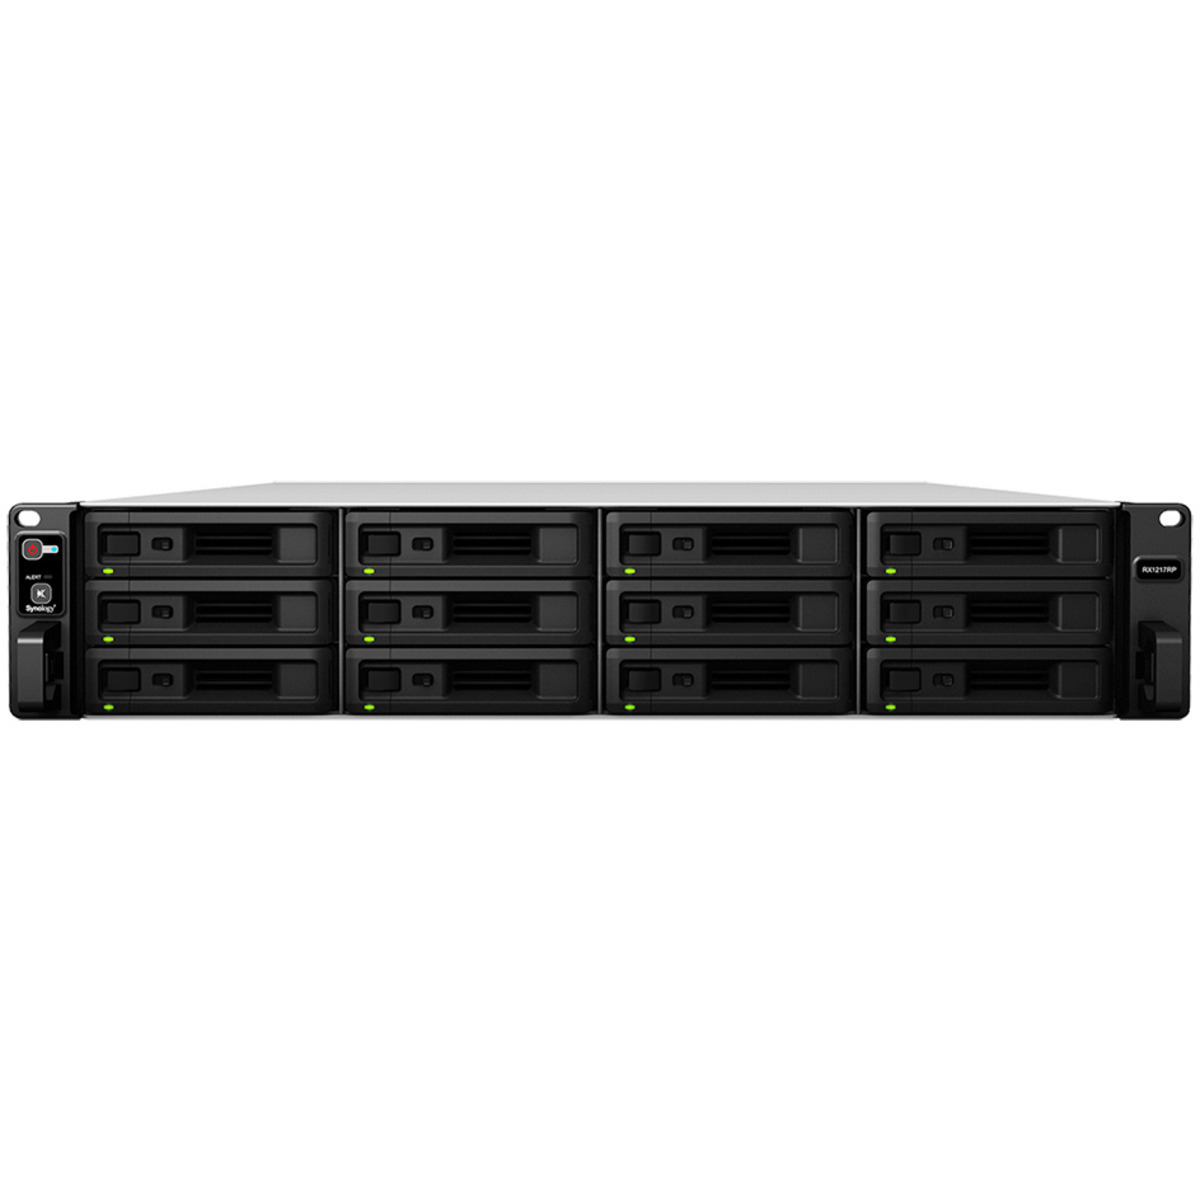 buy $3406 Synology RX1217 72tb RackMount Expansion Enclosure 12x6000gb Western Digital Blue WD60EZAZ 3.5 5400rpm SATA 6Gb/s HDD CONSUMER Class Drives Installed - Burn-In Tested - nas headquarters buy network attached storage server device das new raid-5 free shipping usa christmas new year holiday sale RX1217